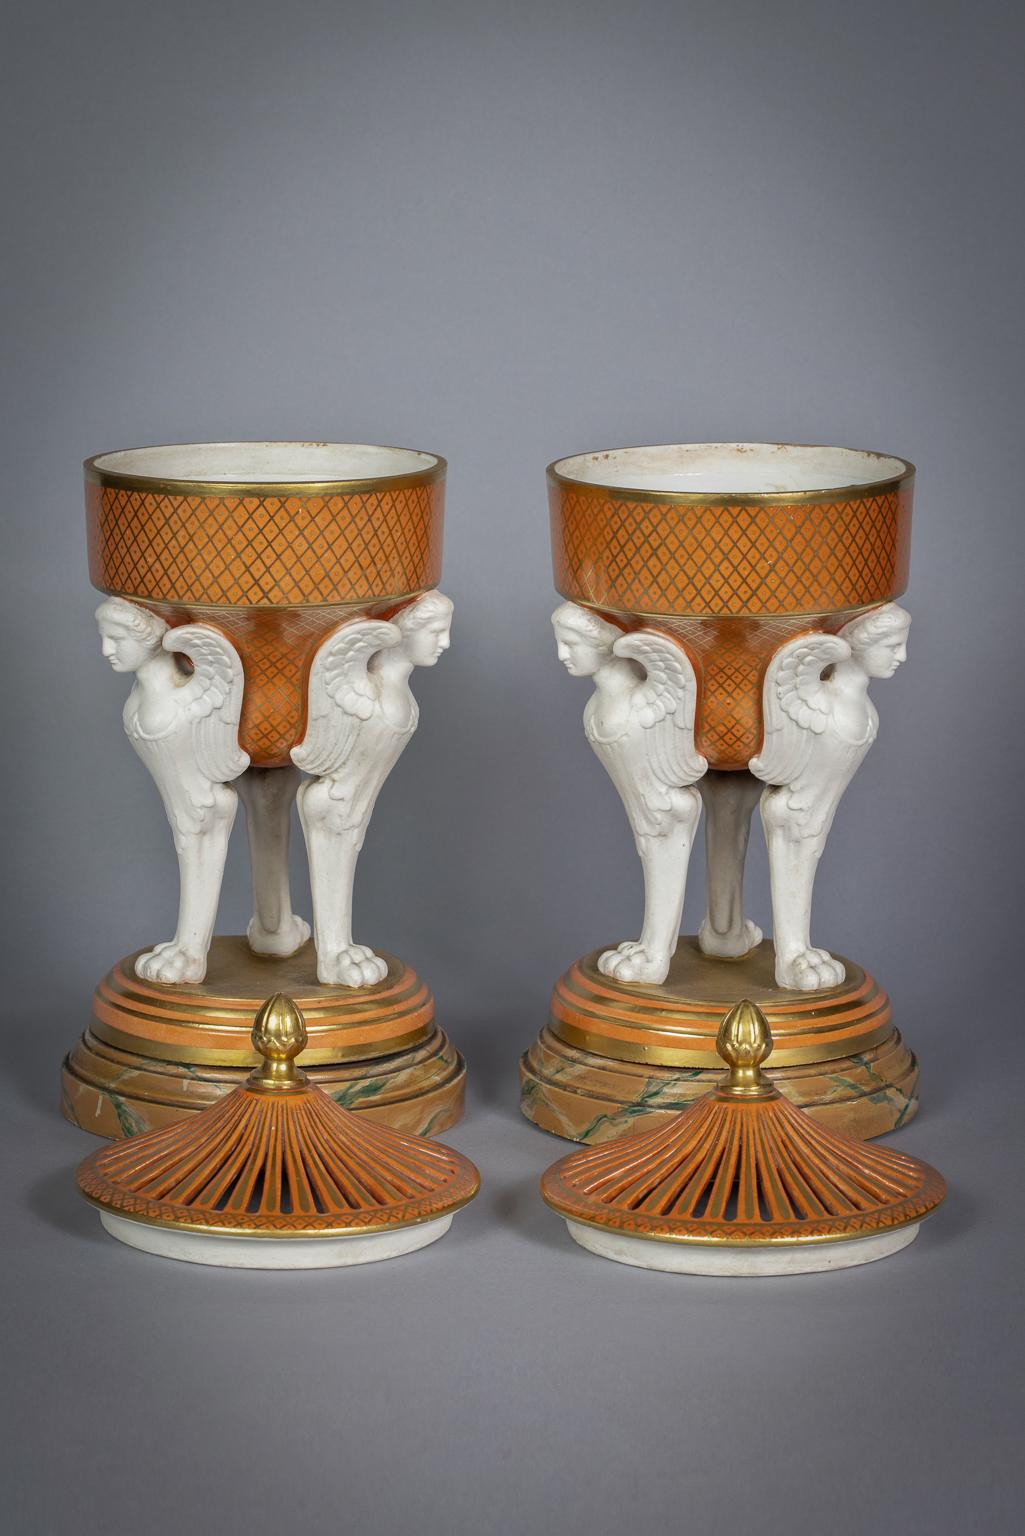 Pair of Covered Porcelain and Bisquit Figural Potpourri Urns, circa 1820 In Good Condition For Sale In New York, NY